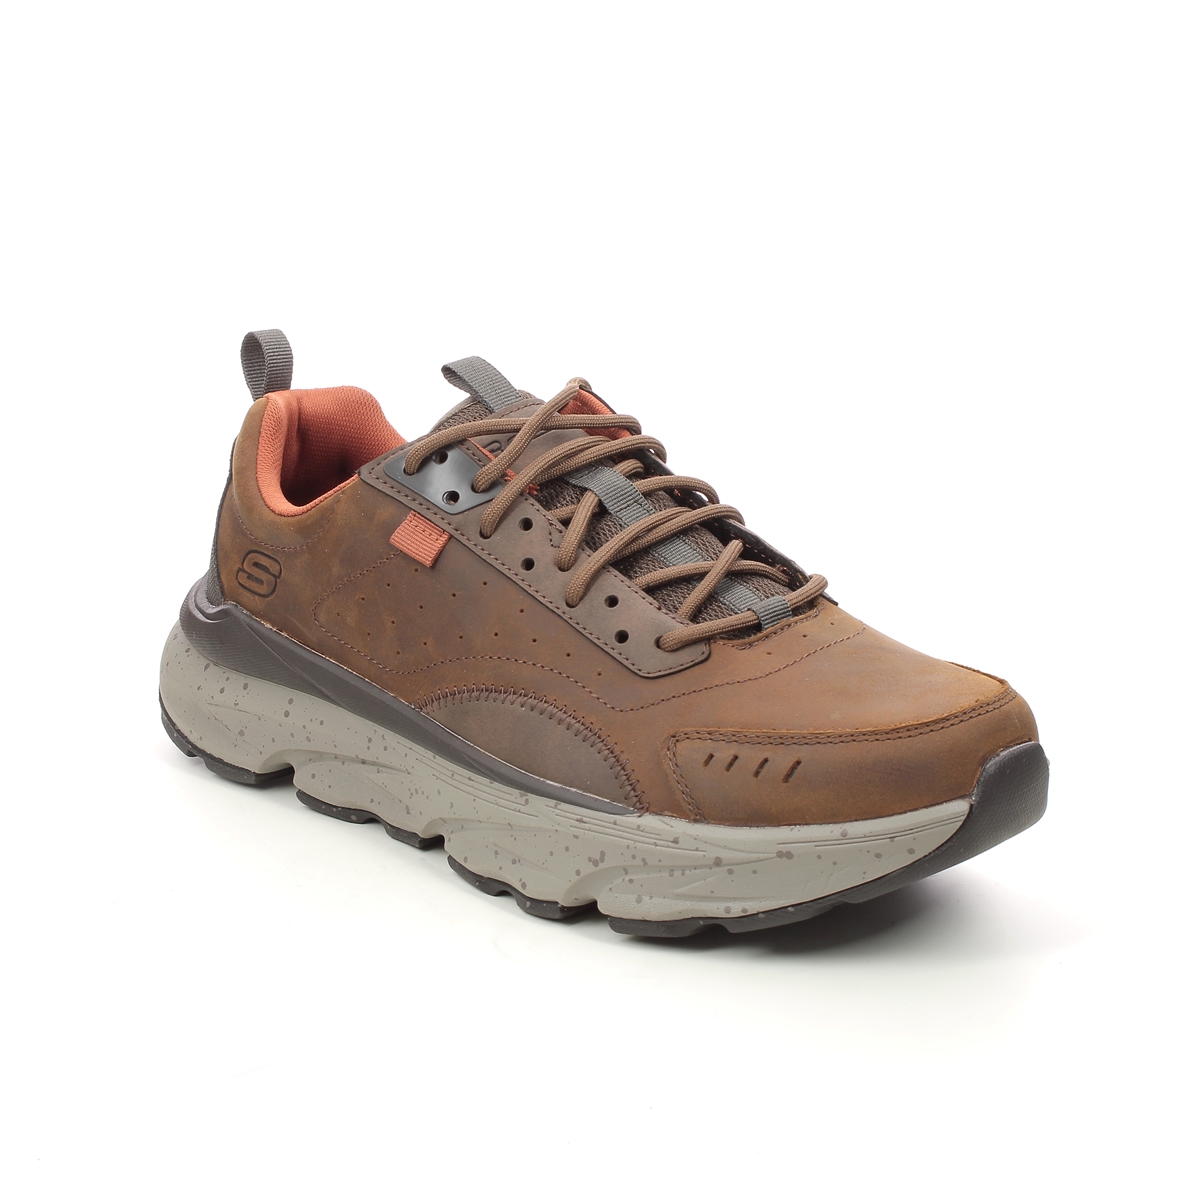 Skechers Delmont Relaxed CDB Brown Mens Walking Shoes 210342